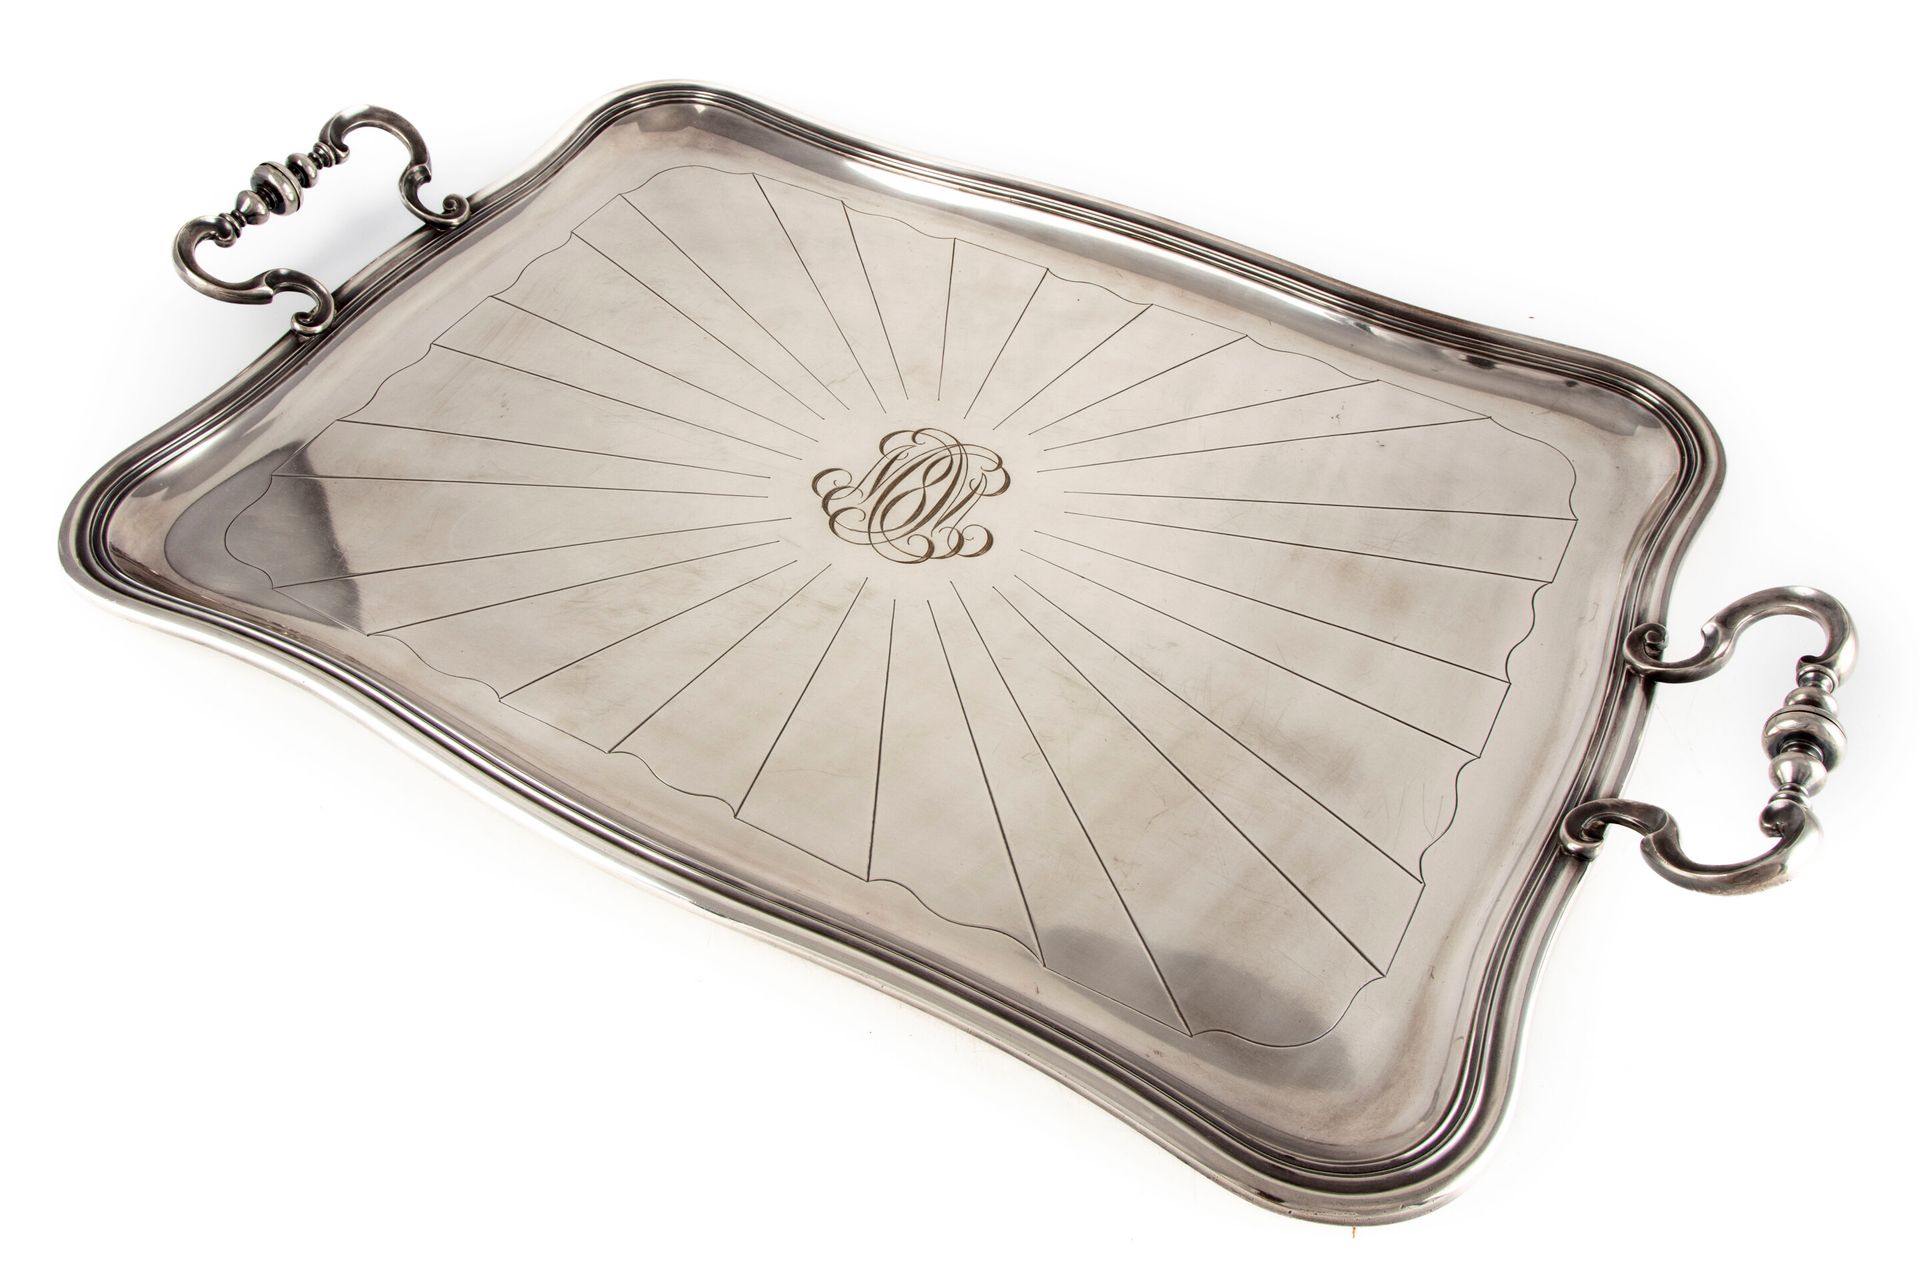 CARDEILHAC House of CARDEILHAC
Large rectangular silver plated serving tray with&hellip;